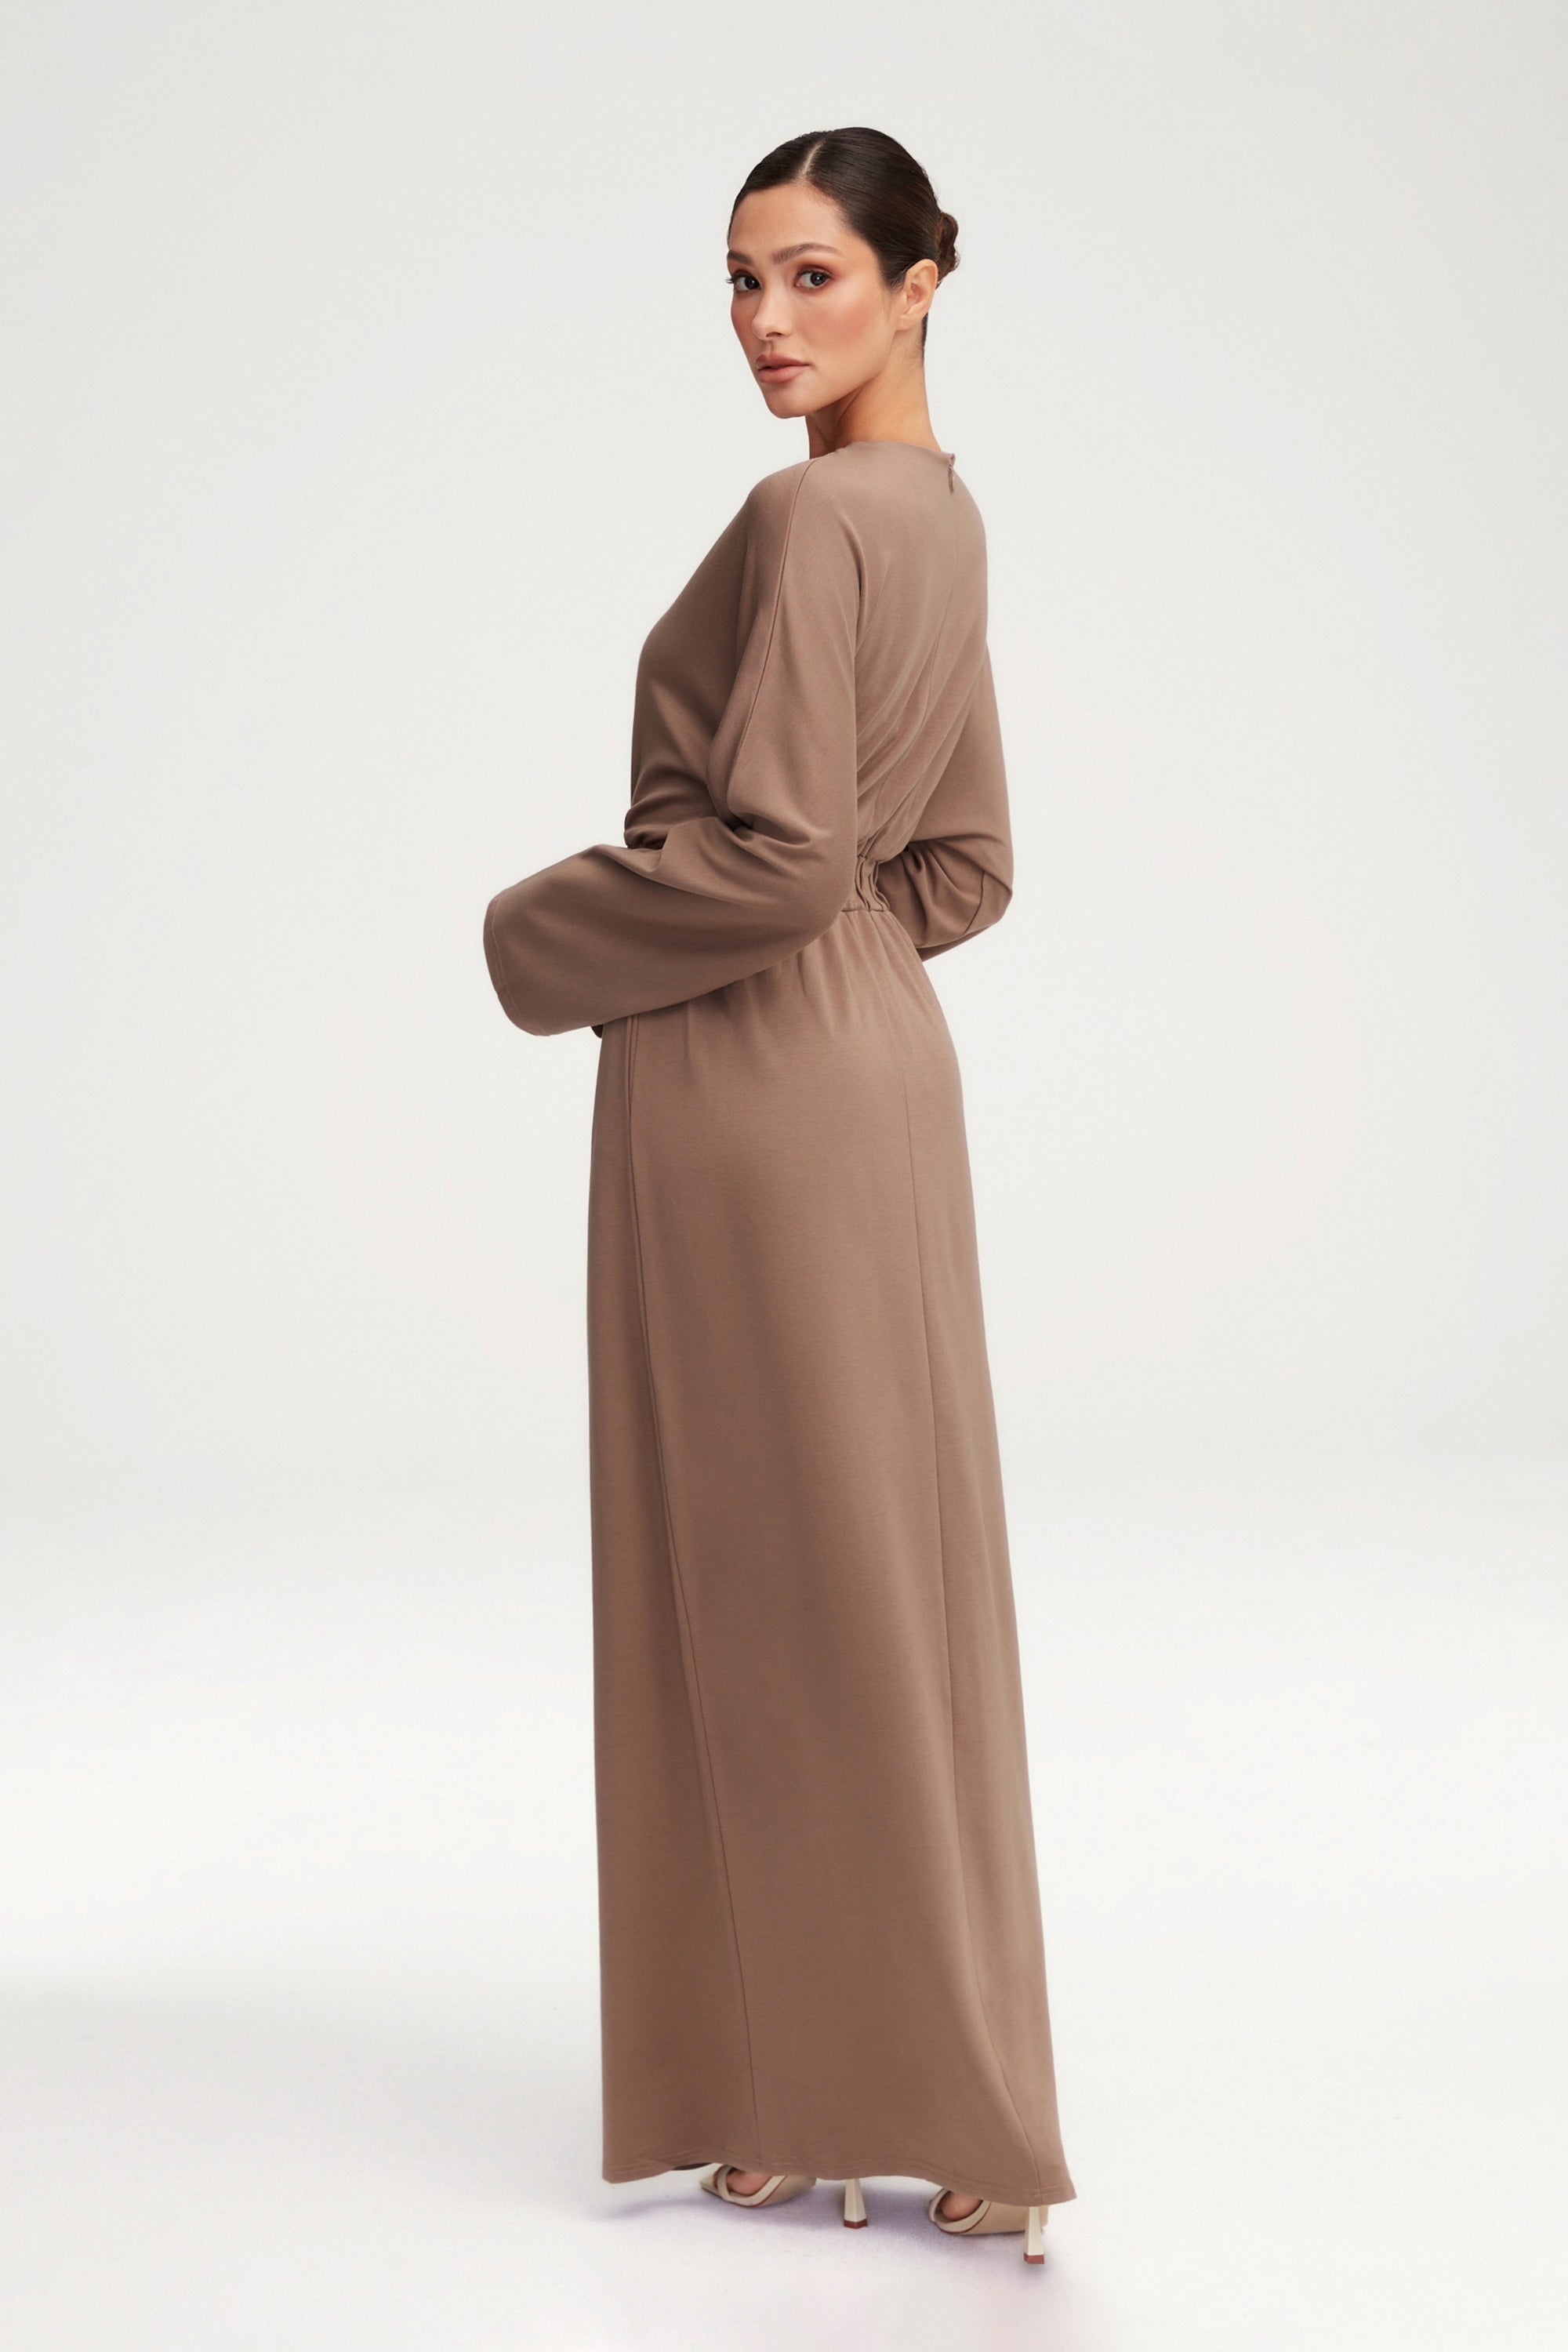 Adelynn Jersey Batwing Maxi Dress - Taupe Clothing epschoolboard 